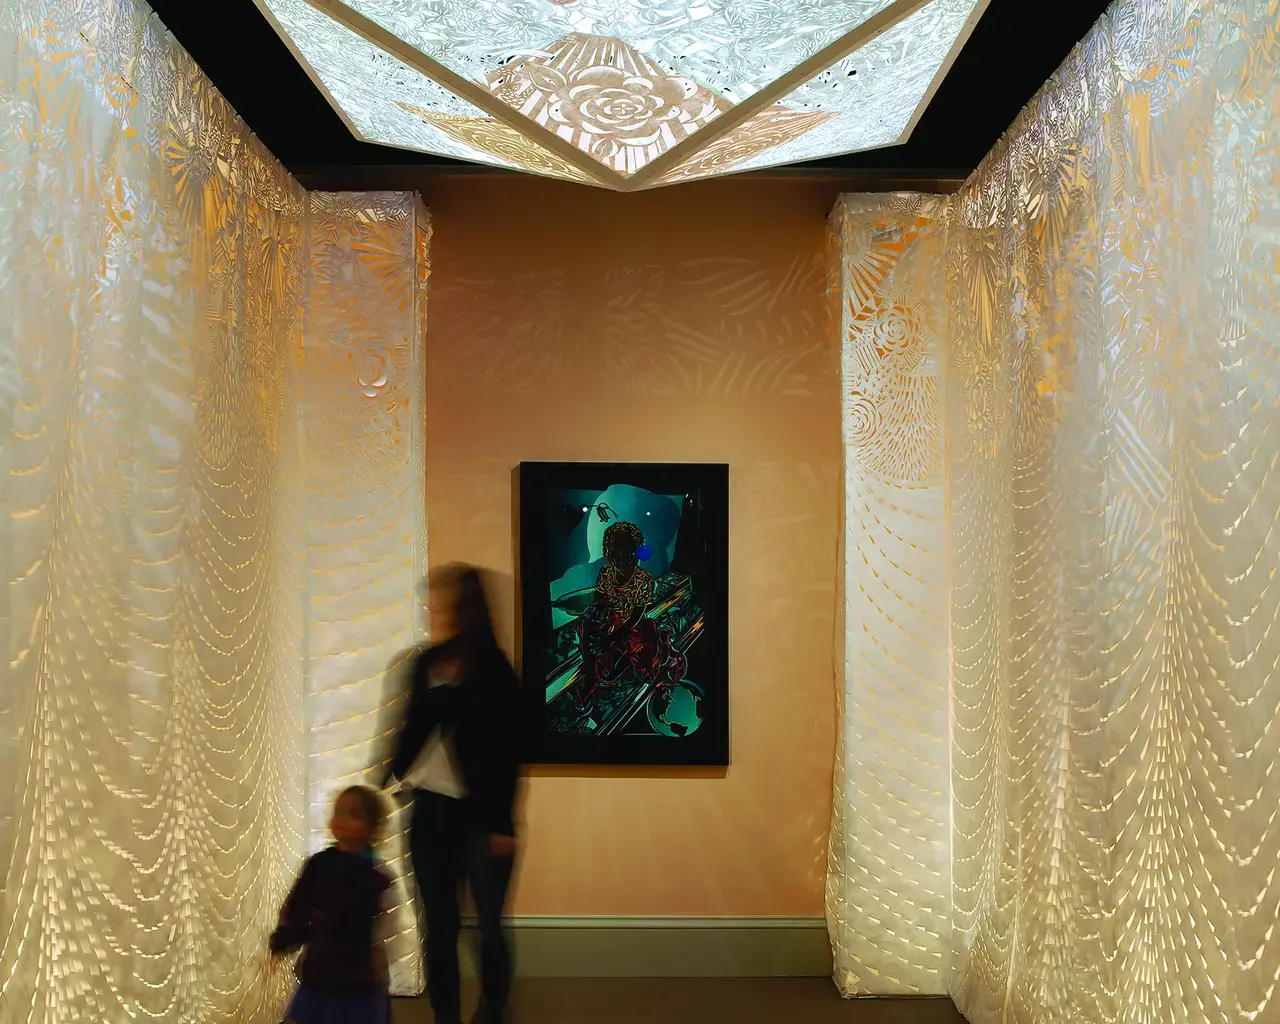 Barbara Earl Thomas' Transformation Room composed of floor to ceiling handcut paper with light shining through.